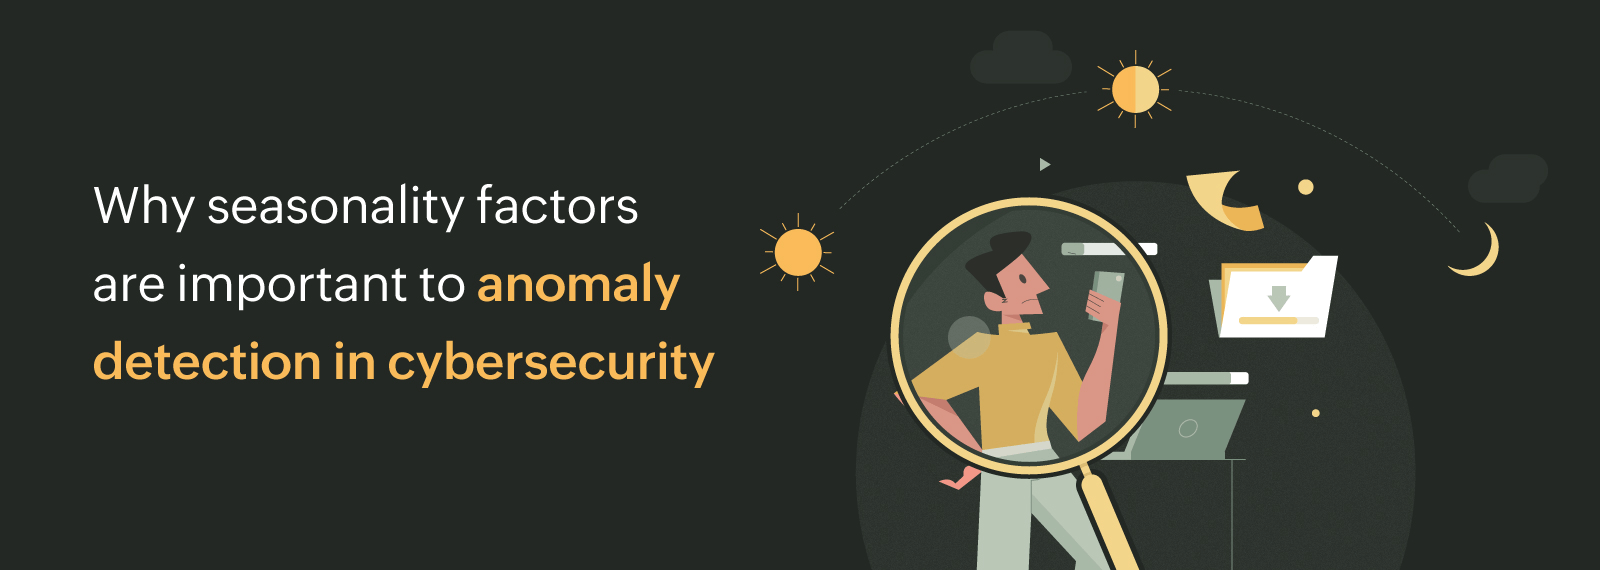 Why seasonality factors are important to anomaly detection in cybersecurity